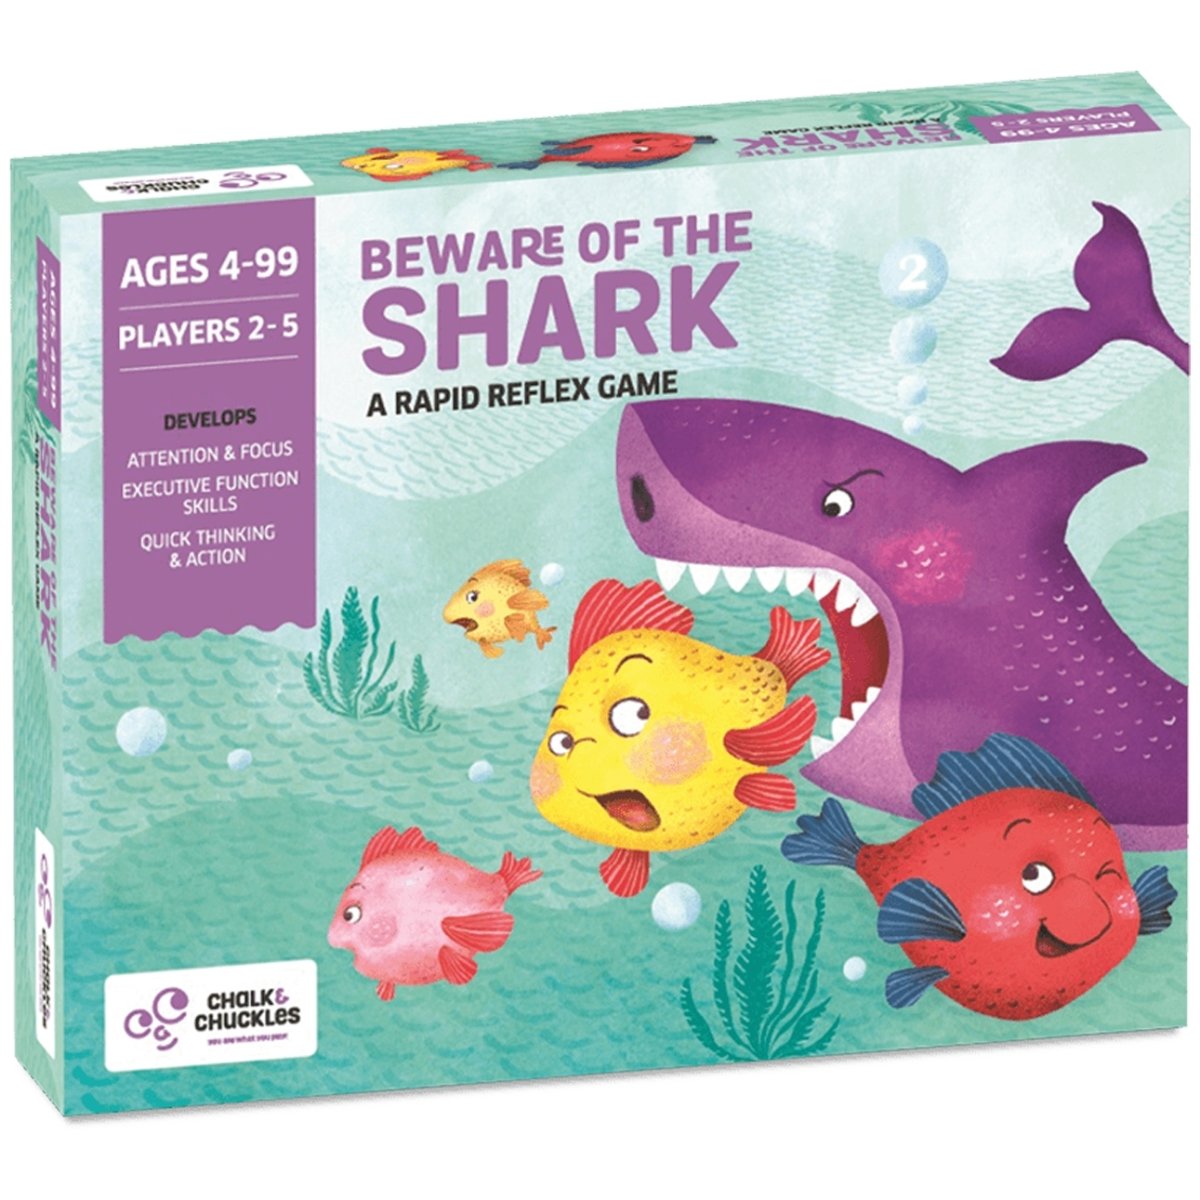 ZCC Beware of the sharks - a rapid reflex game, Age 4-99 freeshipping - Zigyasaw